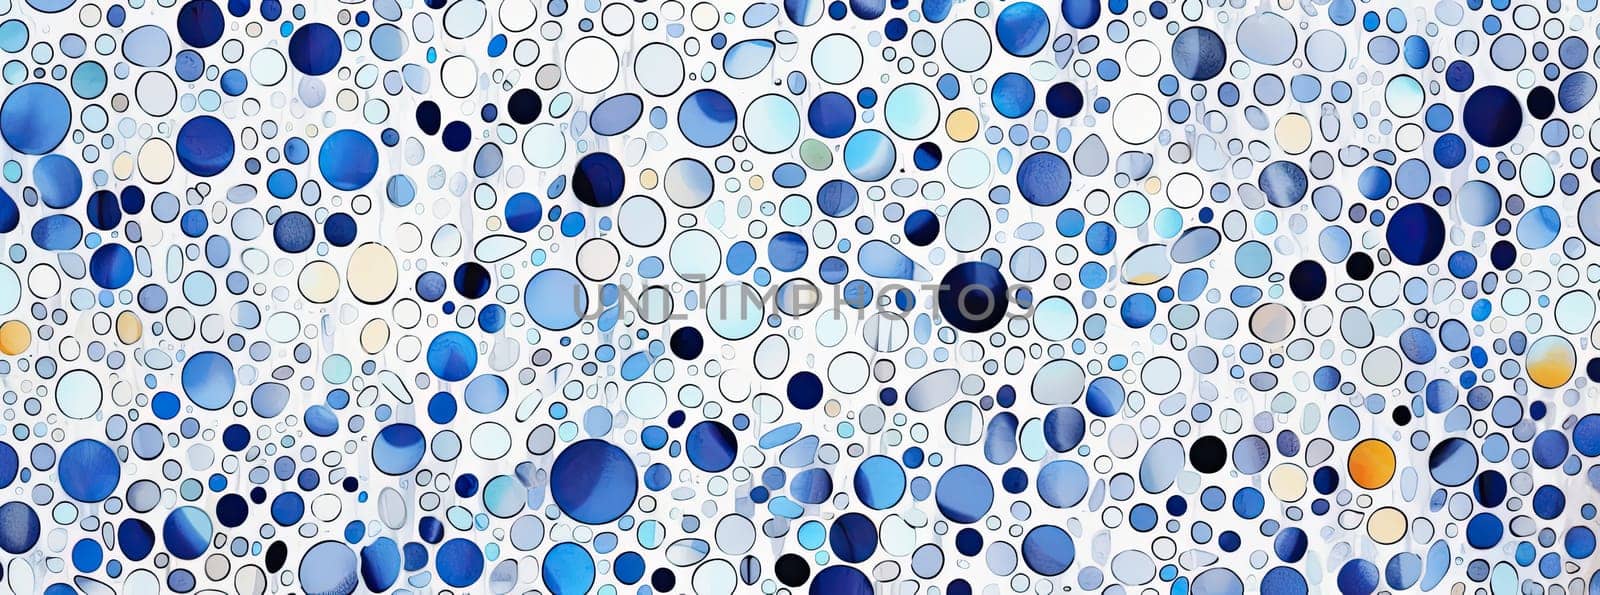 Watercolor background of blue circles on white background